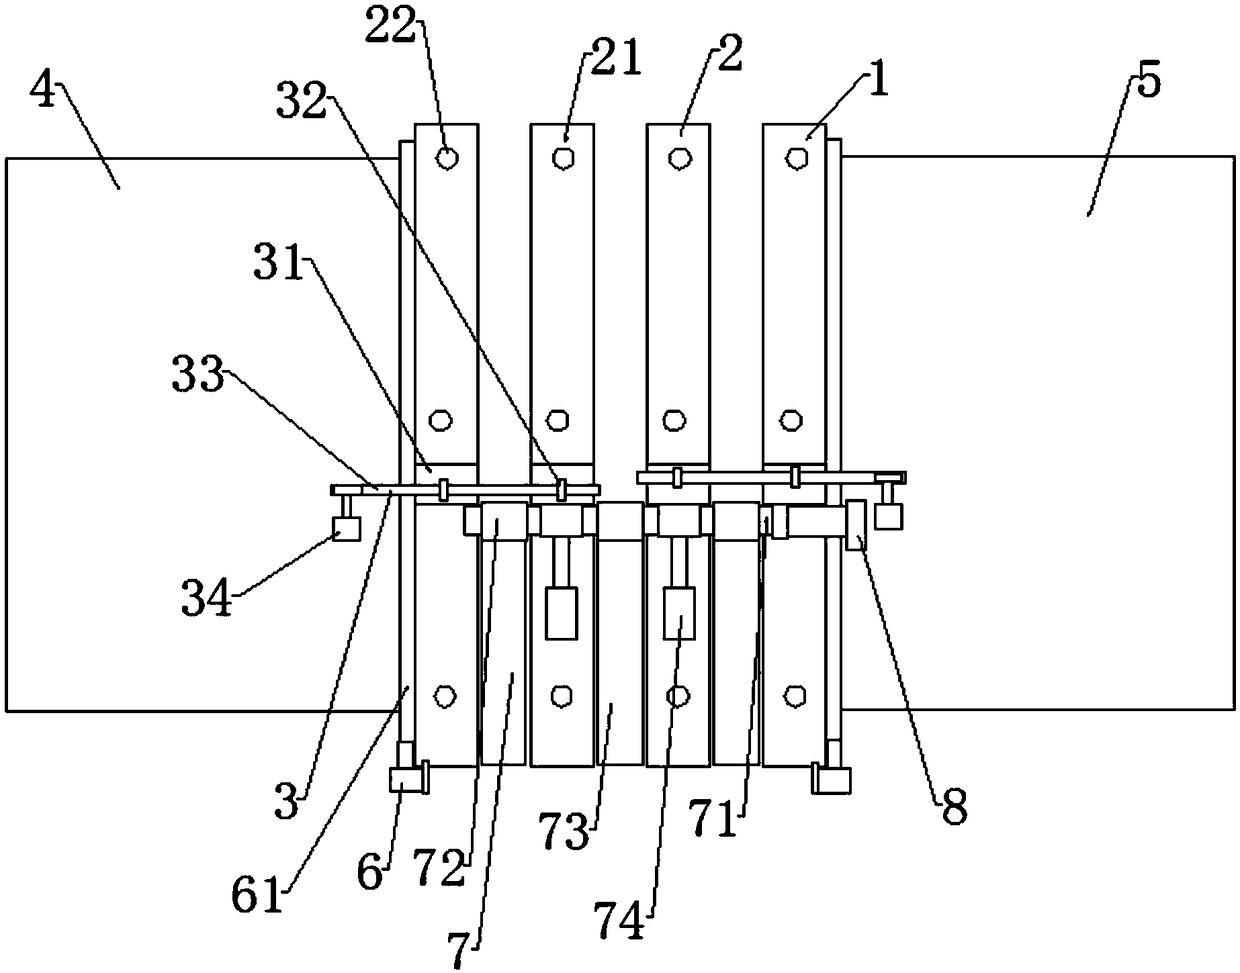 Automatic folding mechanism of clothes